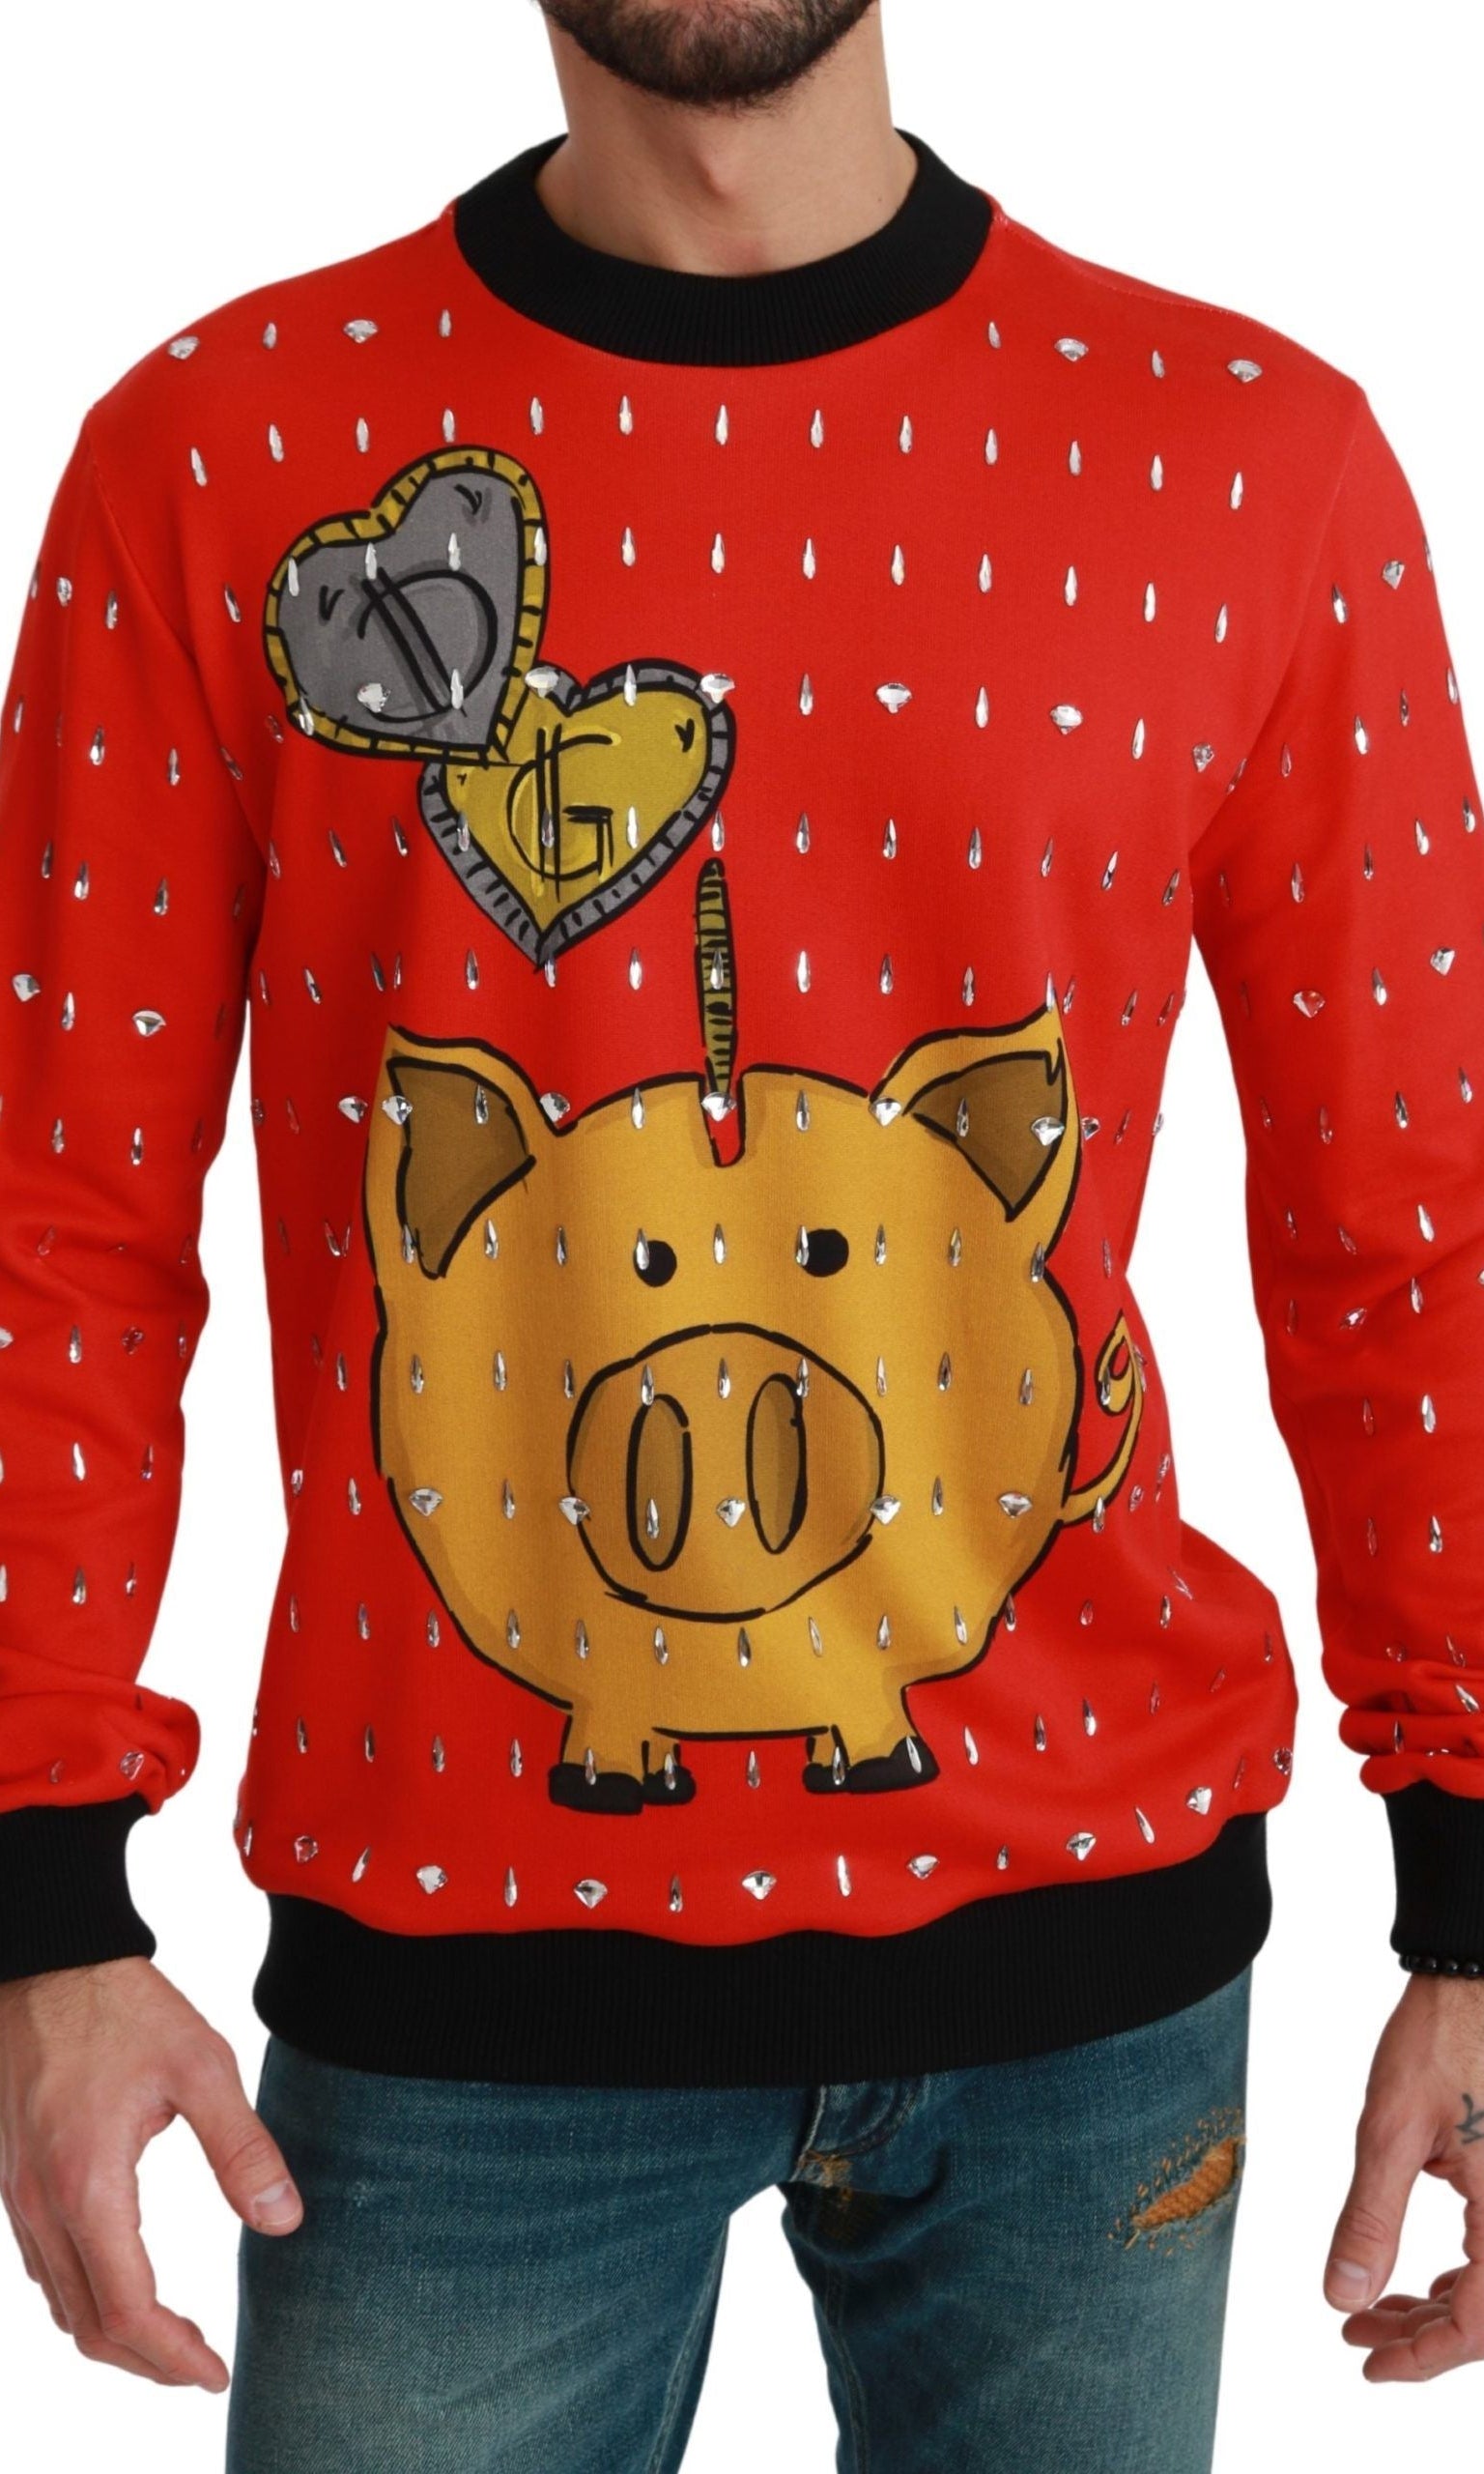 Dolce & Gabbana Red Crystal Pig of the Year Sweater GENUINE AUTHENTIC BRAND LLC